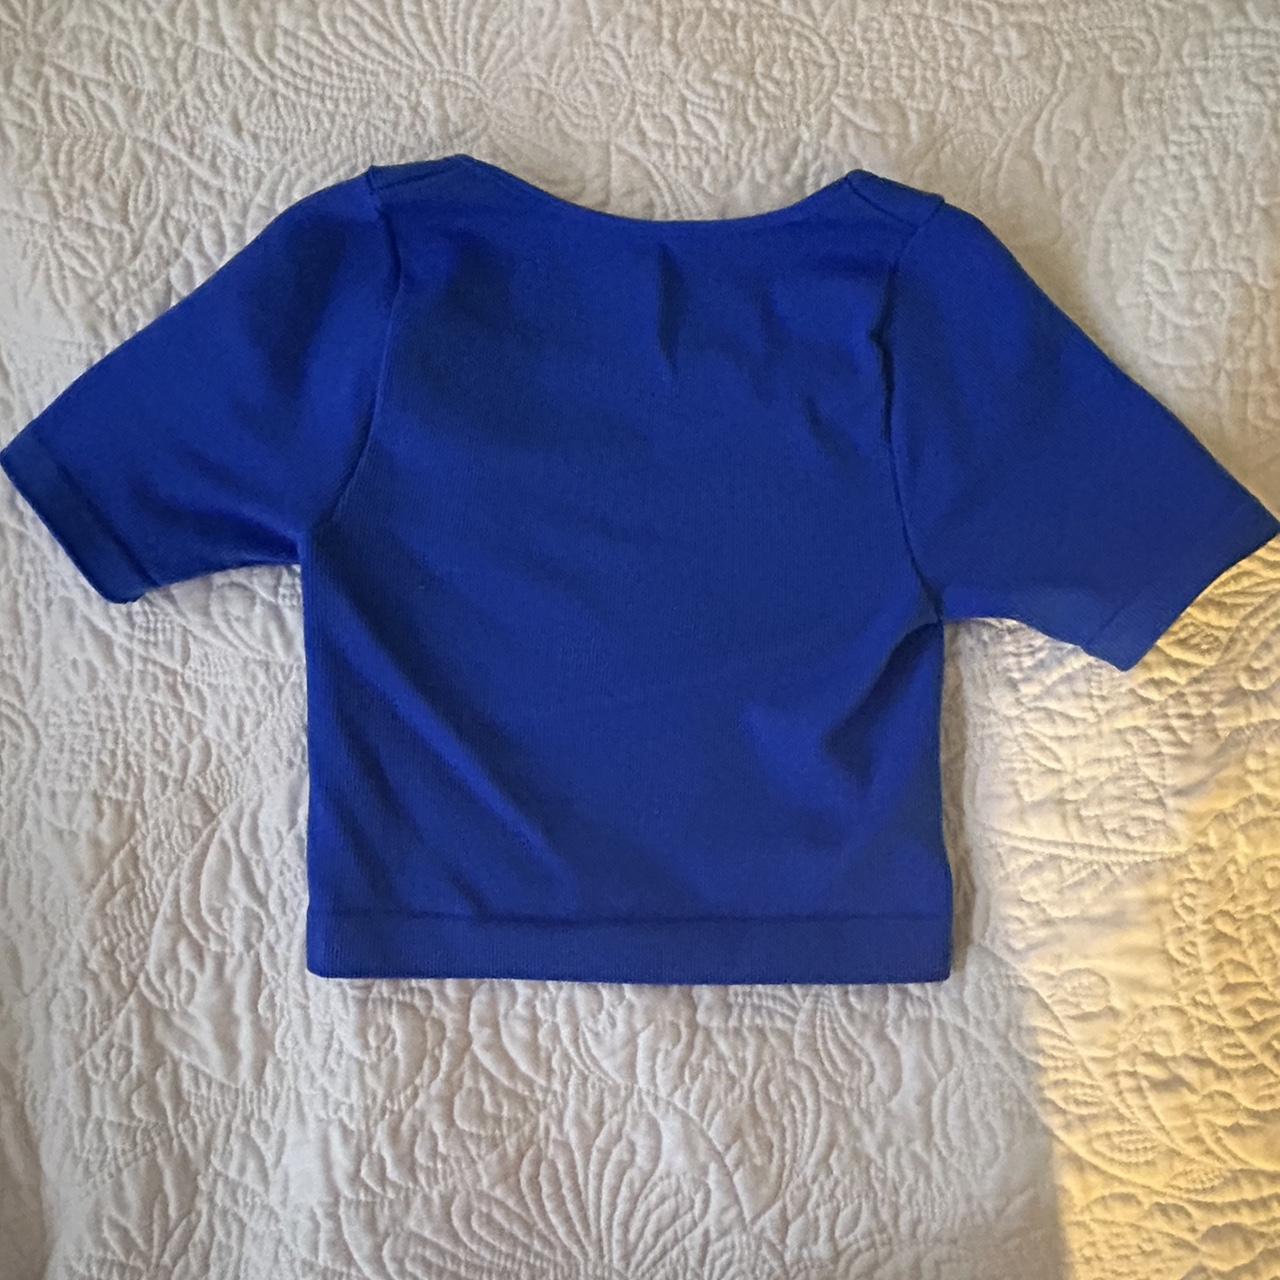 royal blue seamless short sleeve crop top. from